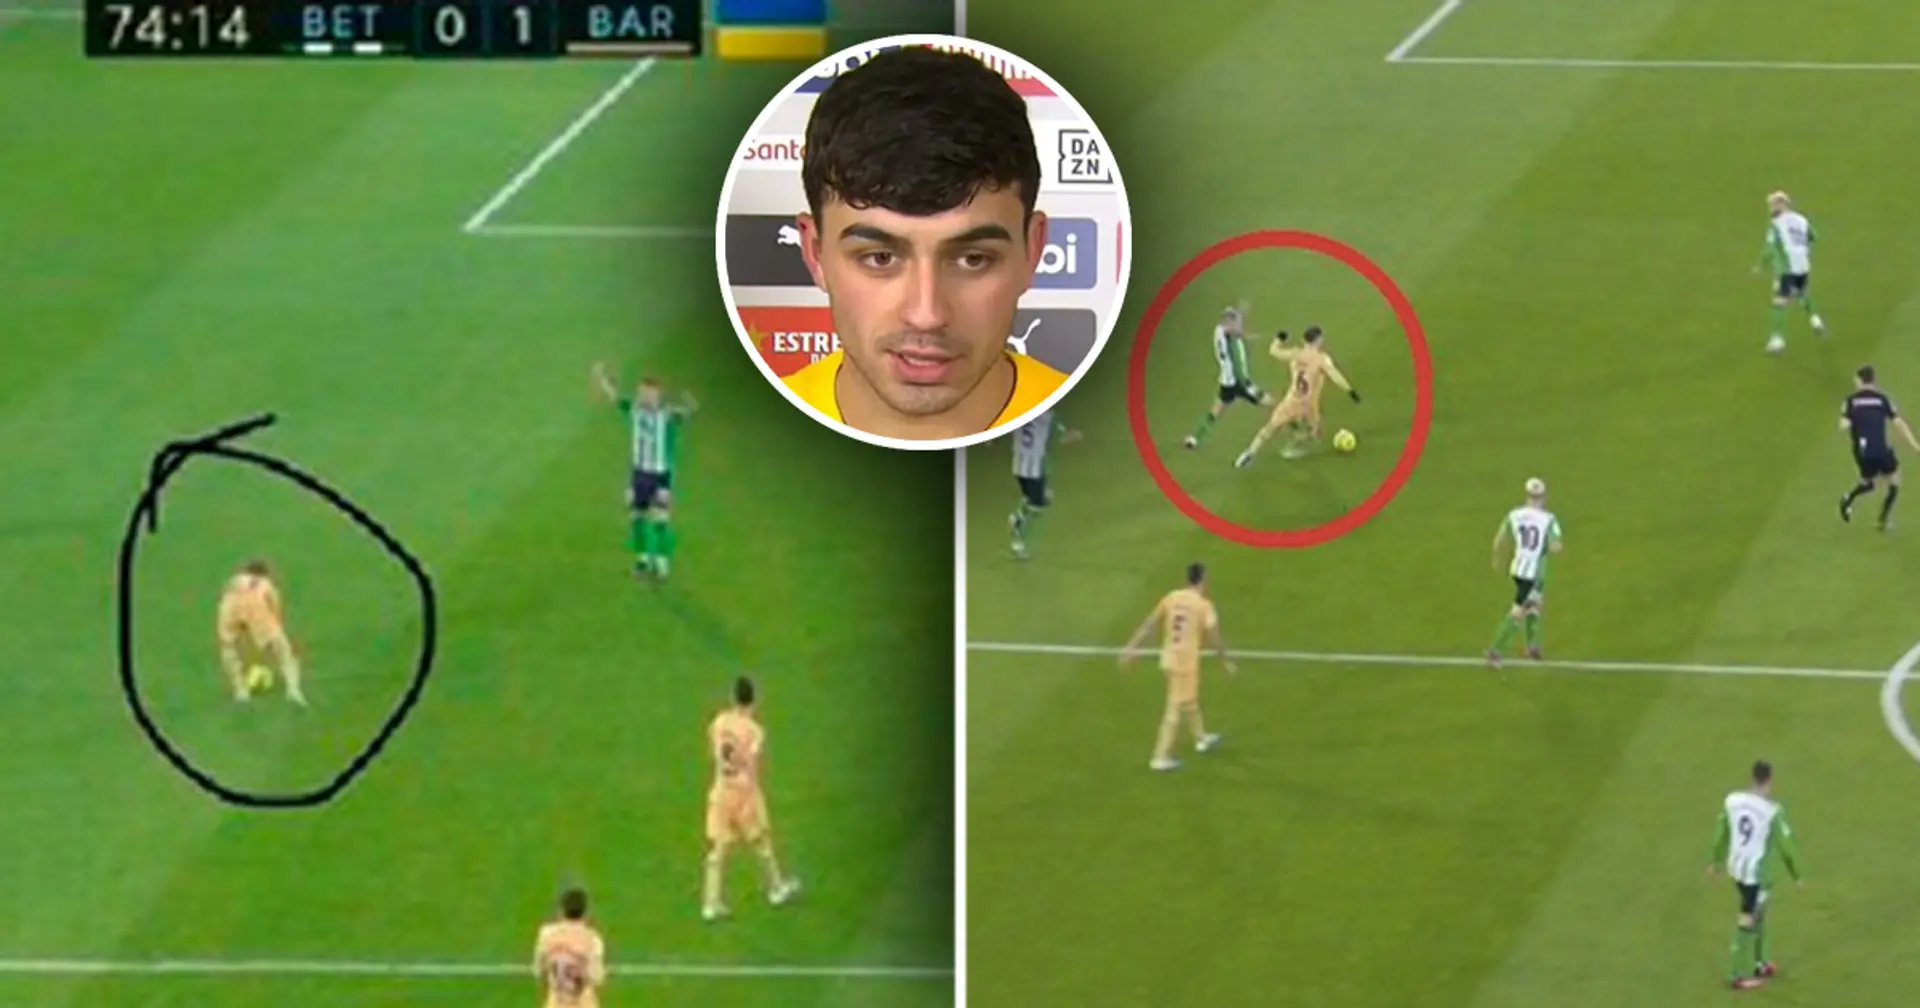 Journalist names Barca's 'generator of football' v Real Betis, not Pedri or Busquets